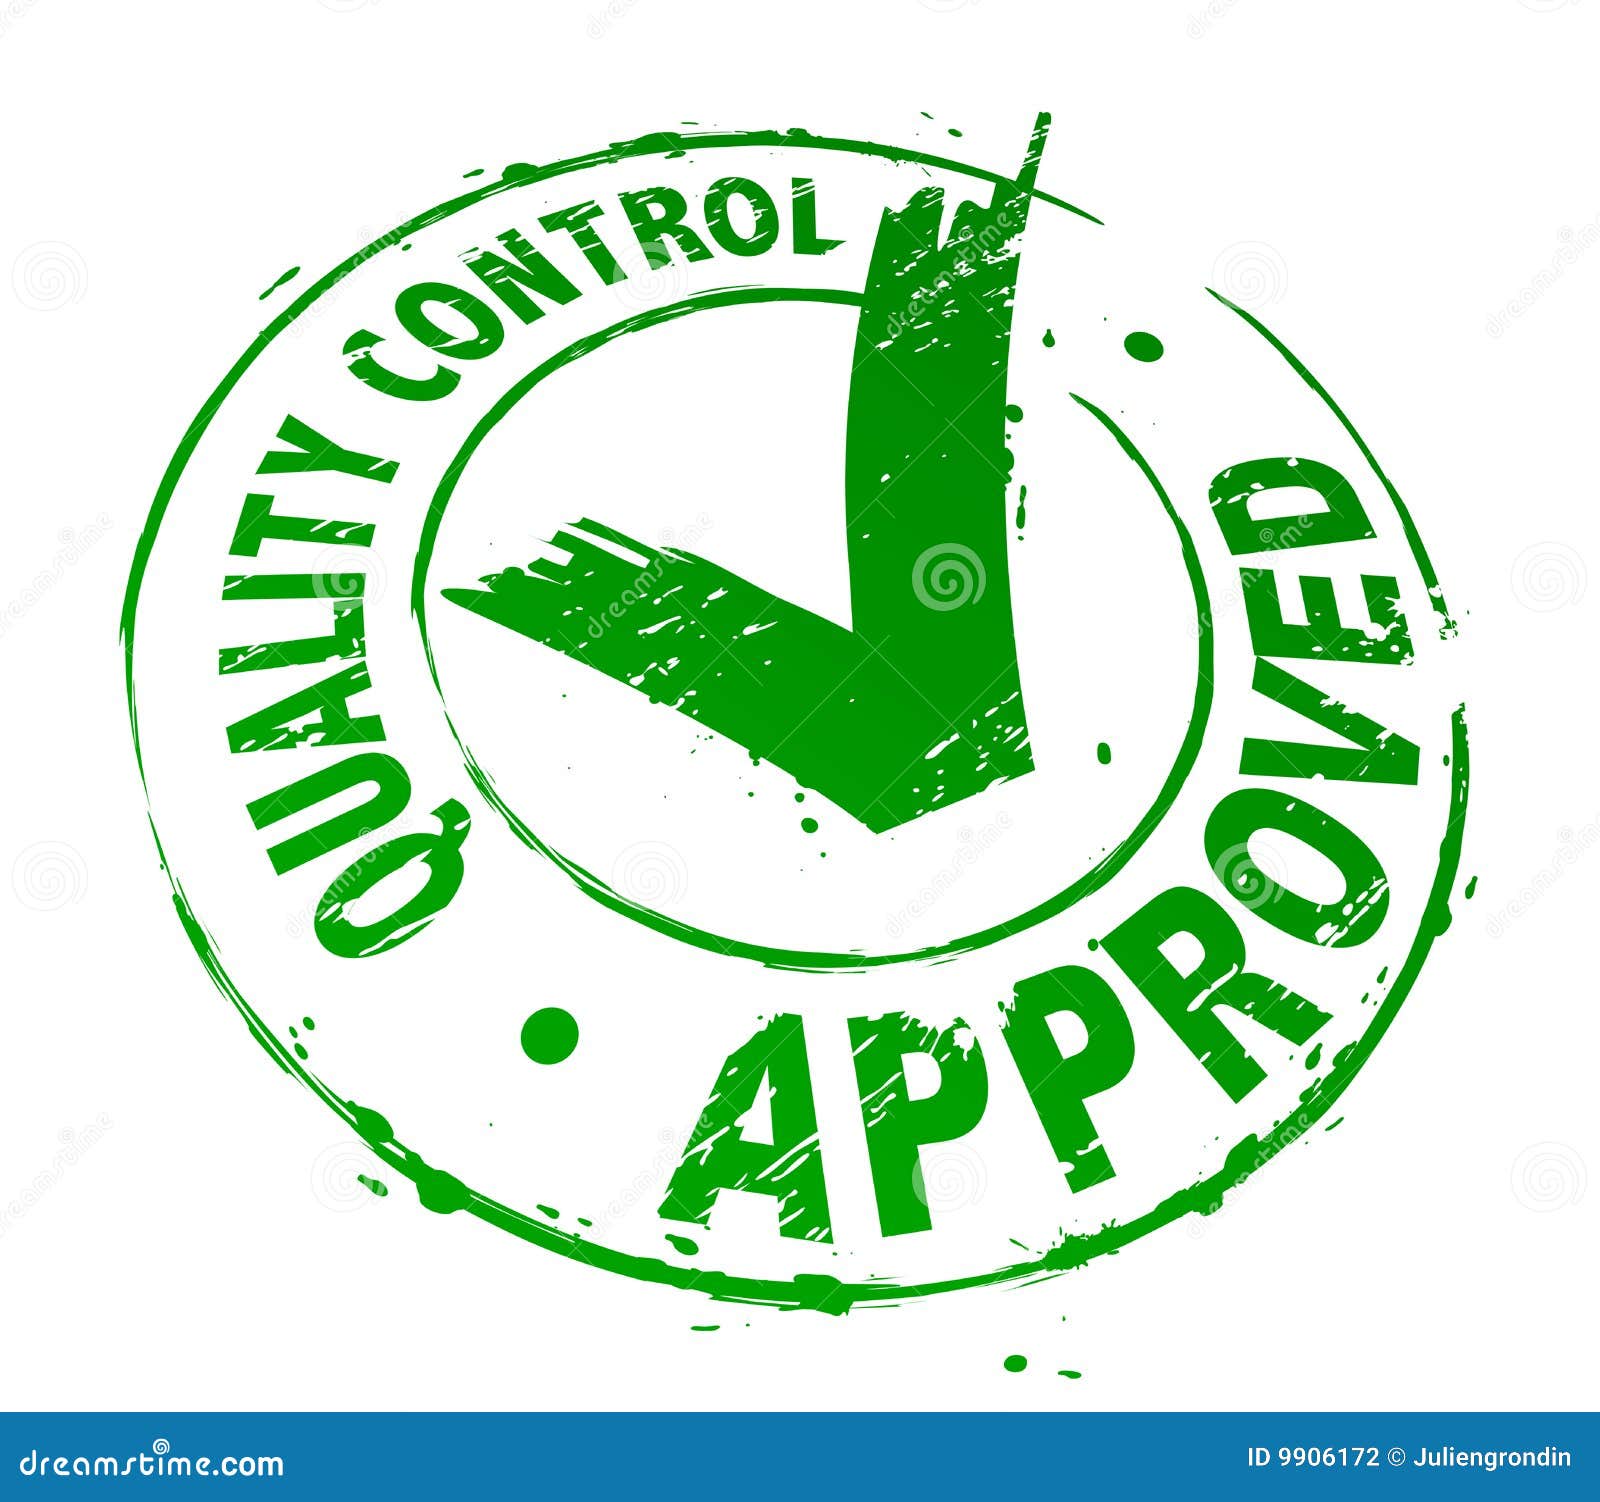 clipart for quality control - photo #10